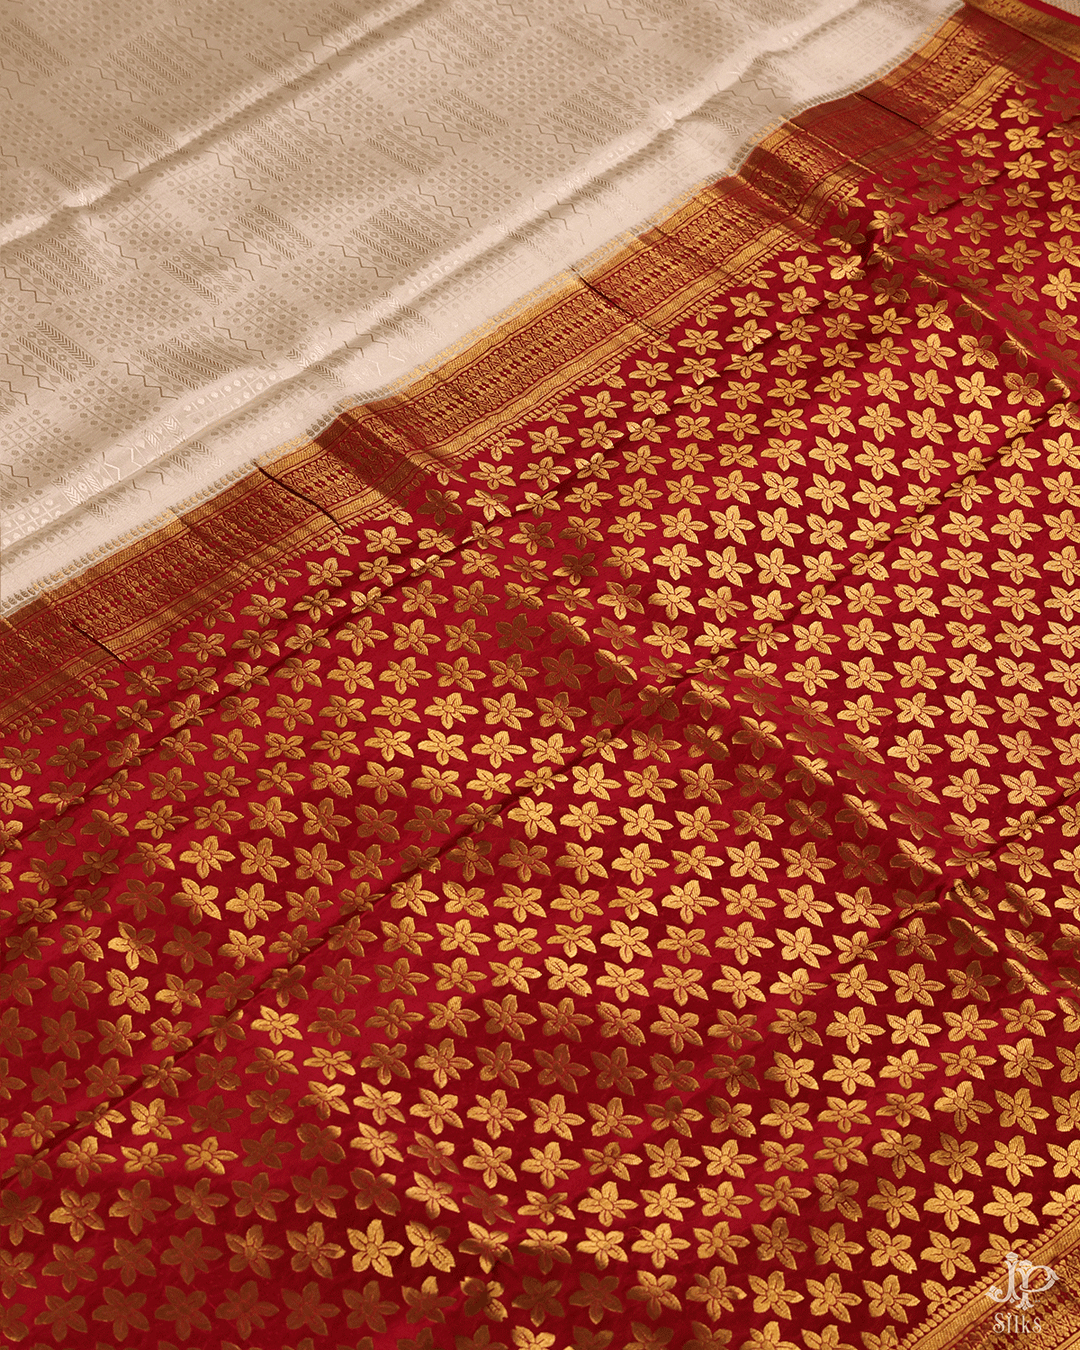 Off White and Red Mysore Silk Saree - D4802 - View 4